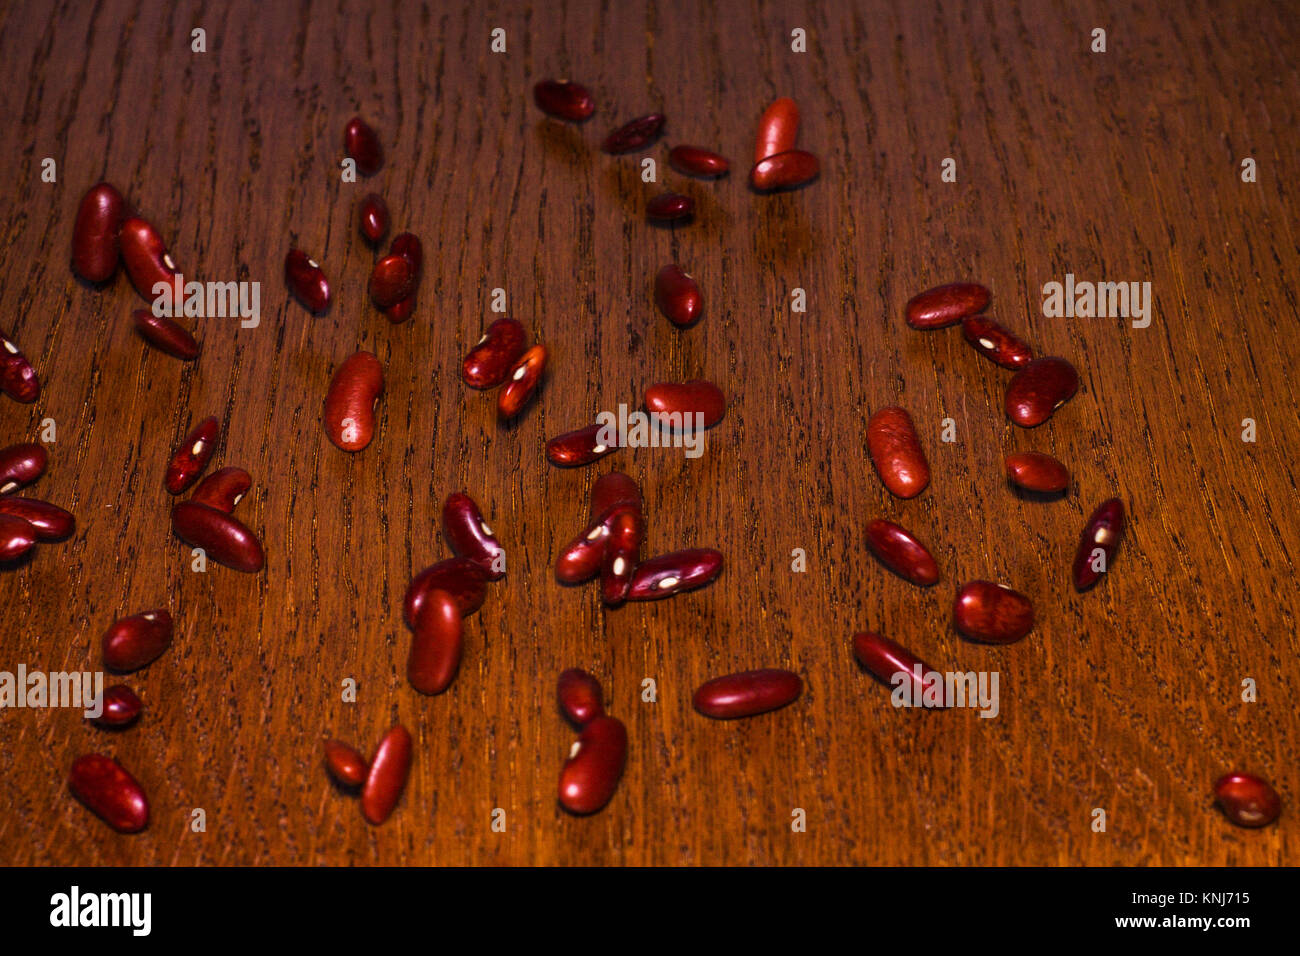 Many kidney beans roll down the wooden table. Stock Photo